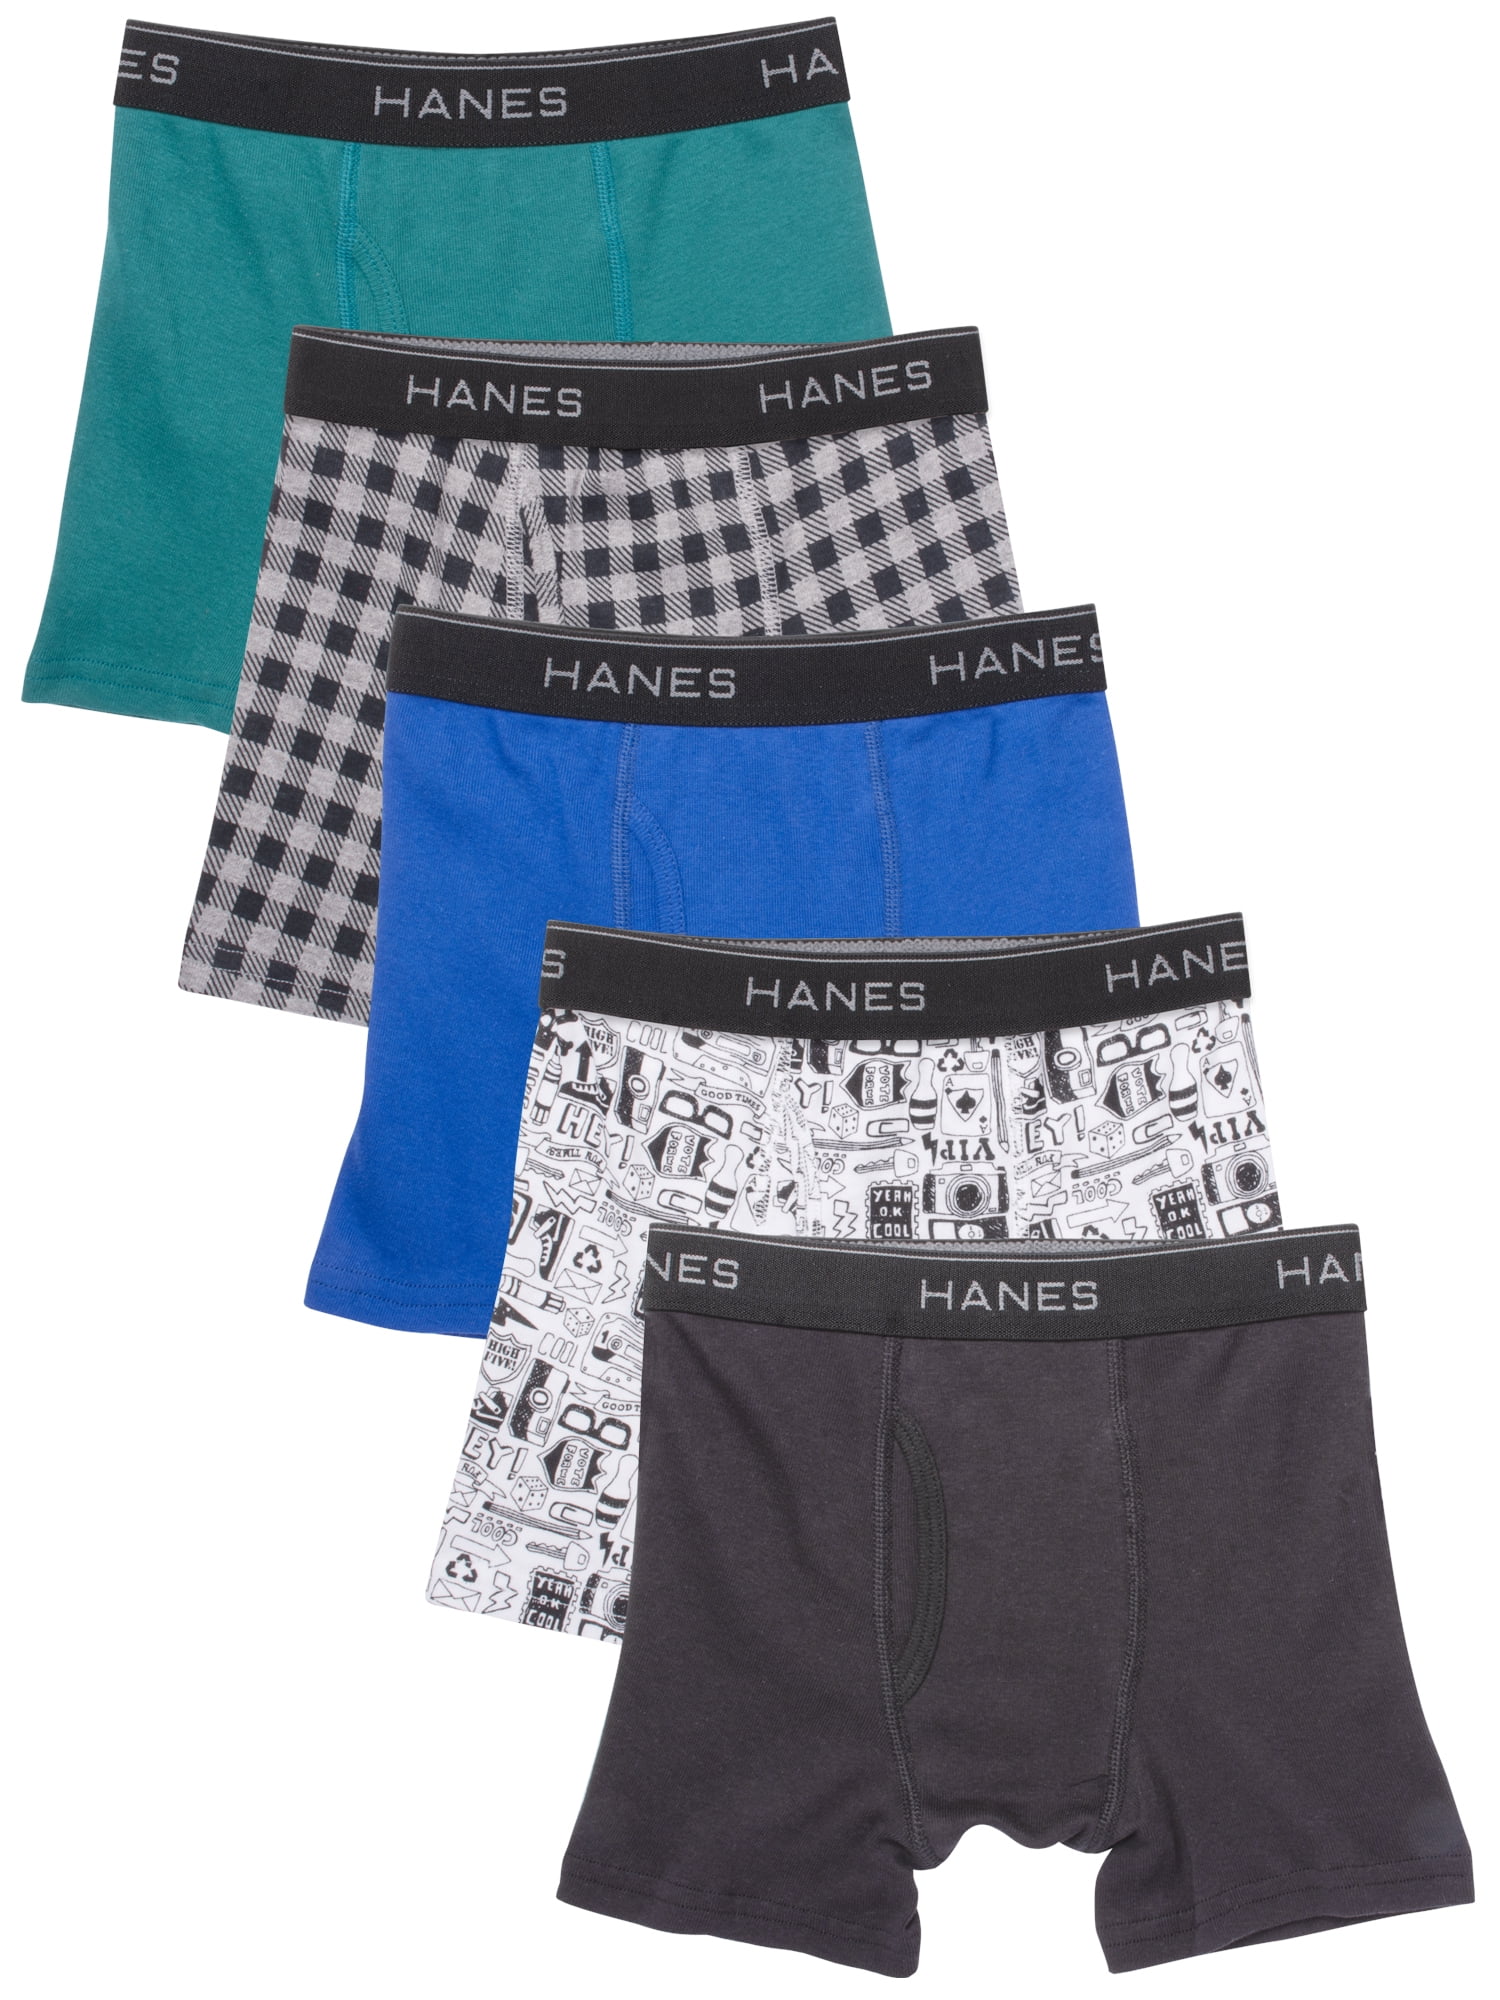 Hanes Boys' Woven Boxers 5 Pack, Sizes S-XL 